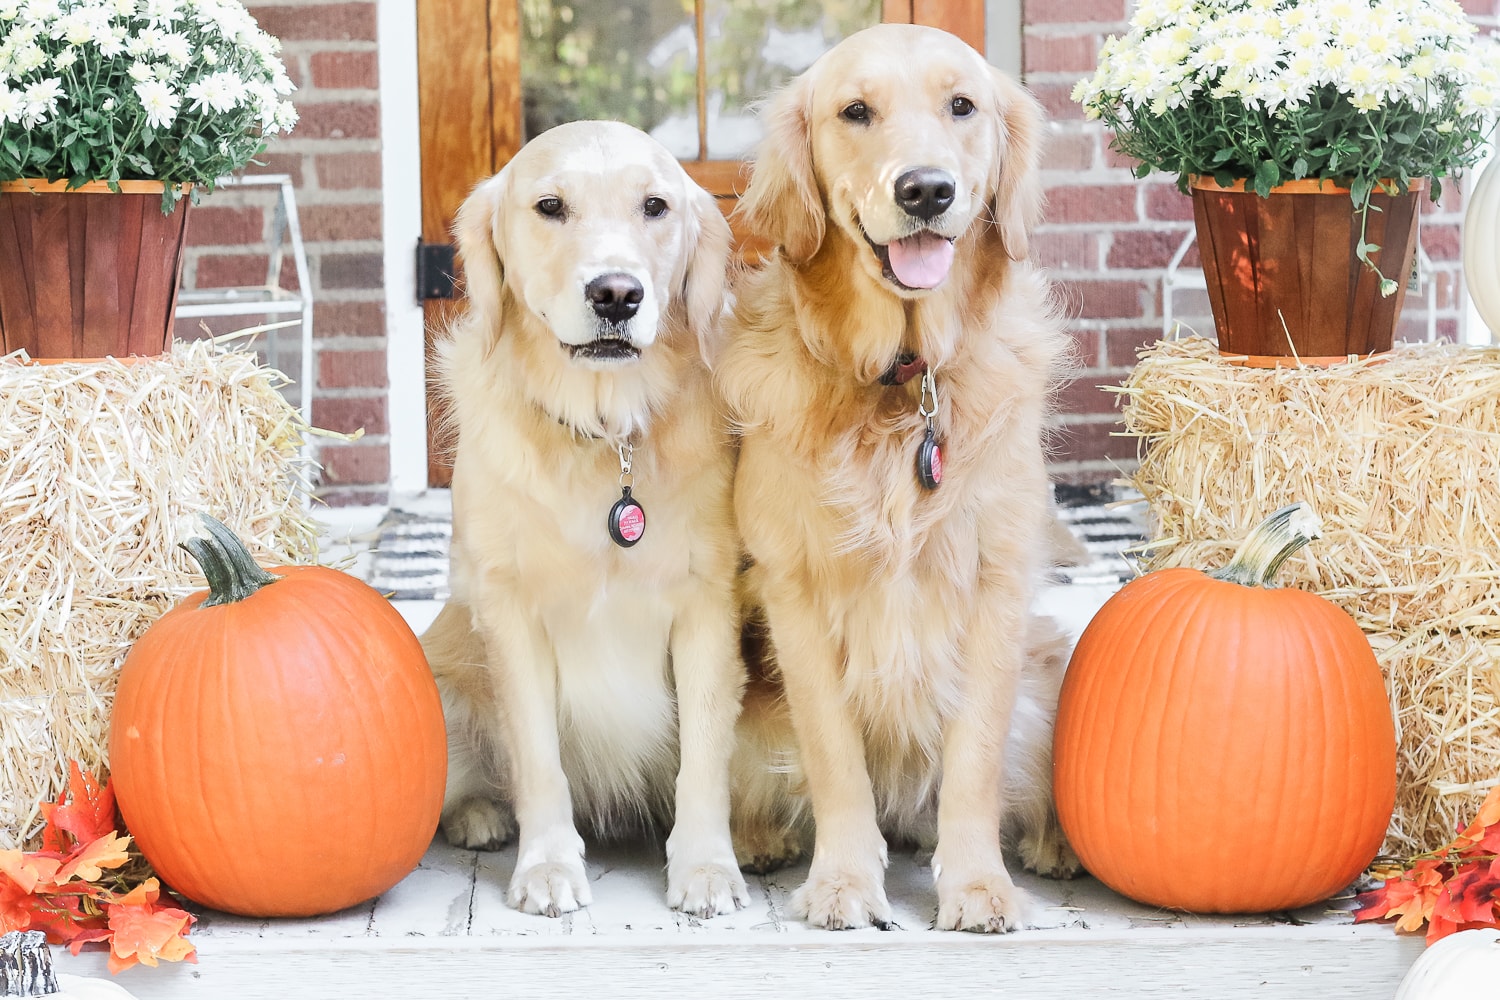 Golden retrievers sandwiched between some affordable fall decor finds from Walmart+ on Diary of a Debutante